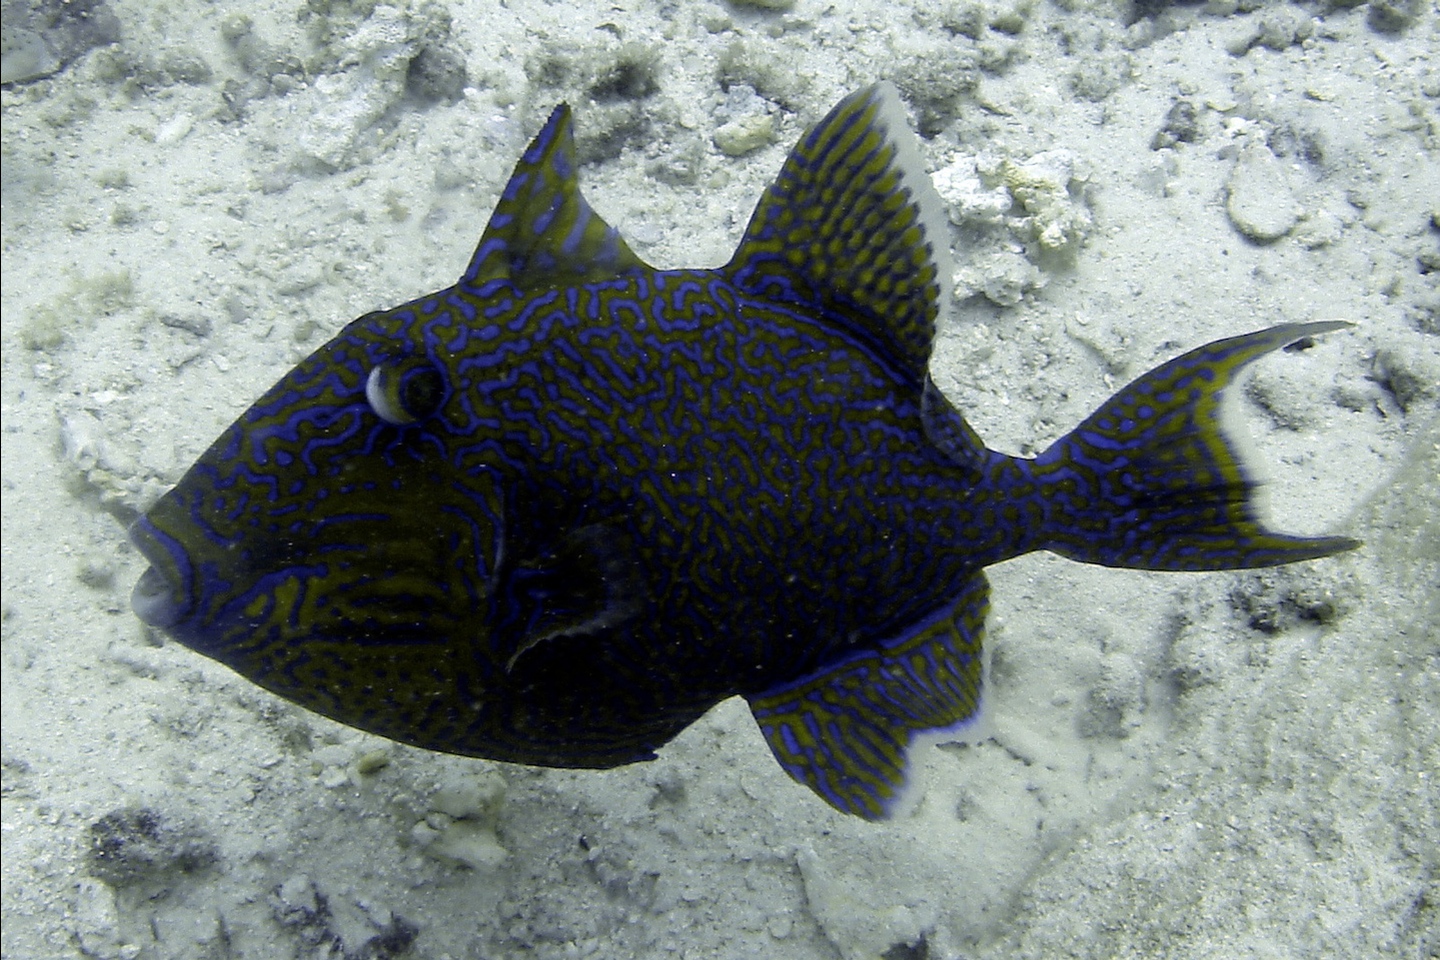 Yellow-spotted triggerfish